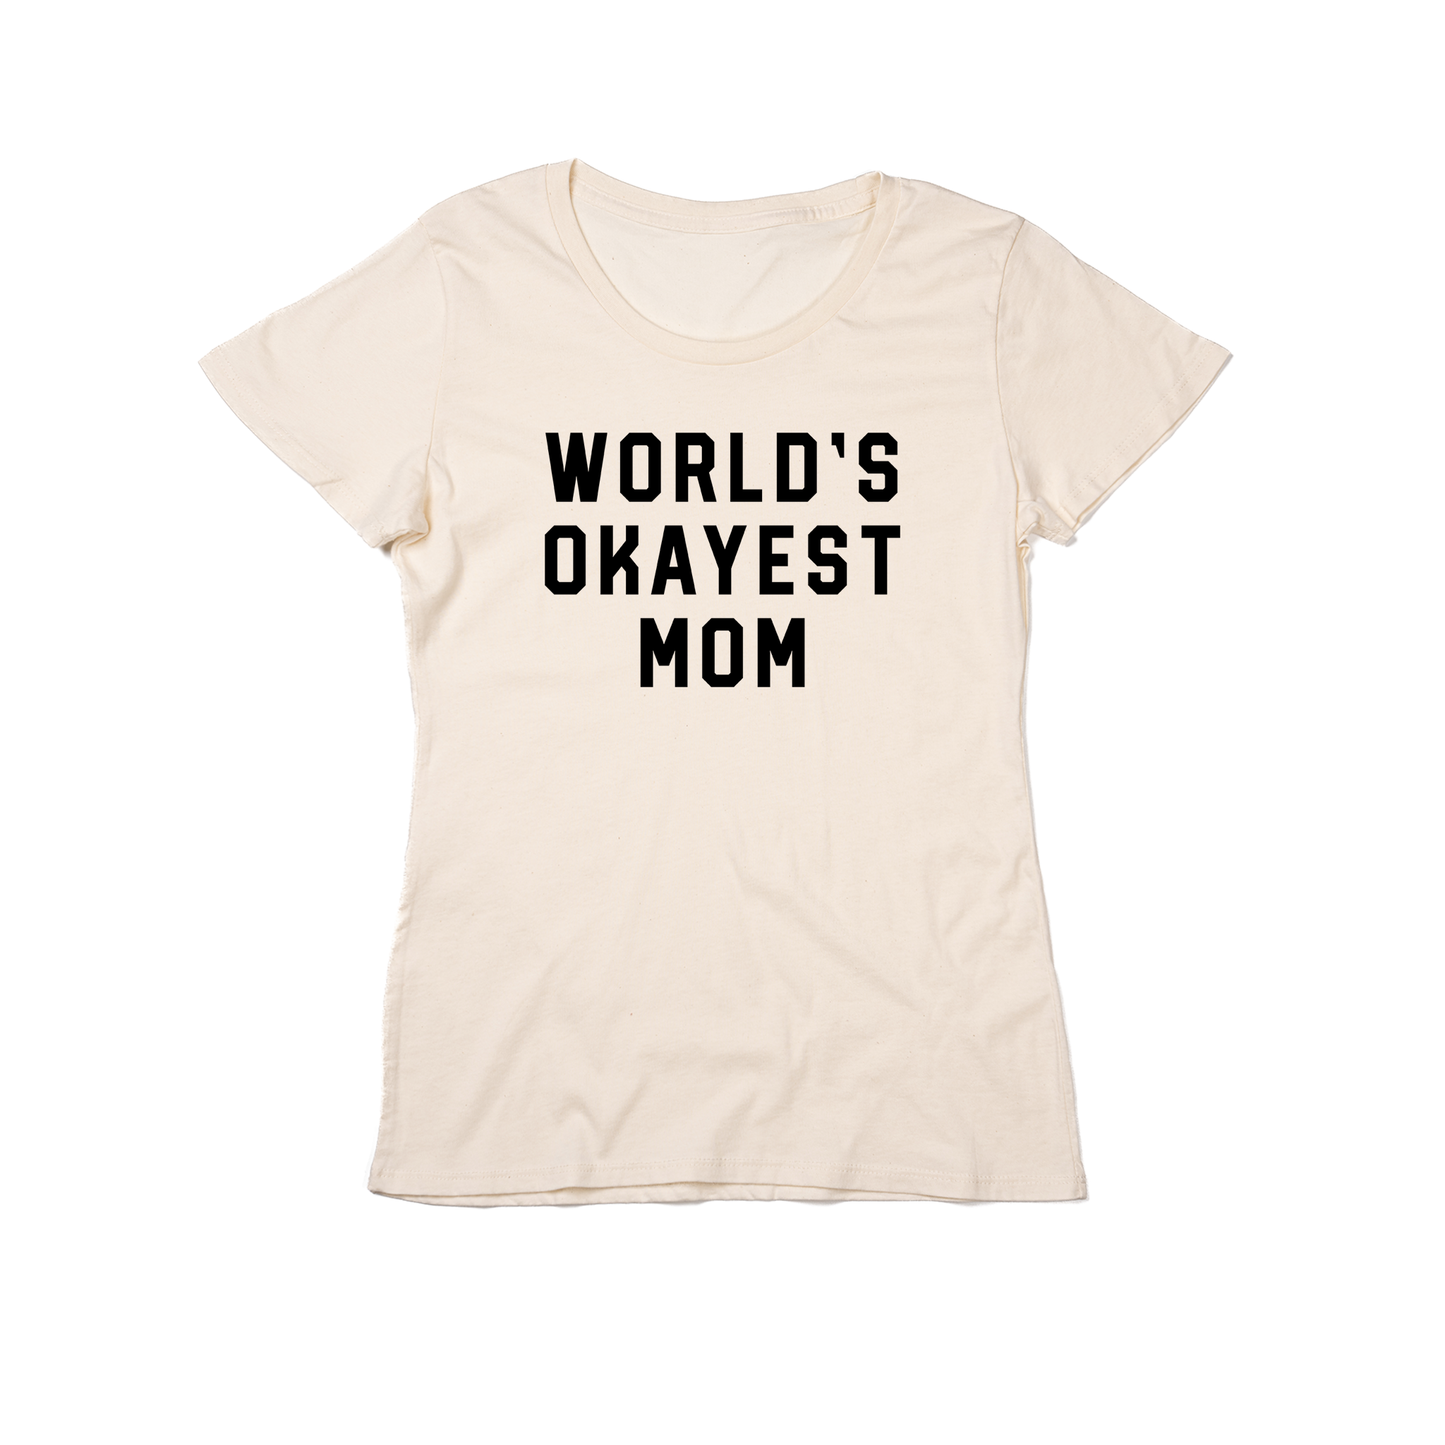 Worlds Okayest Mom (Black) - Women's Fitted Tee (Natural)